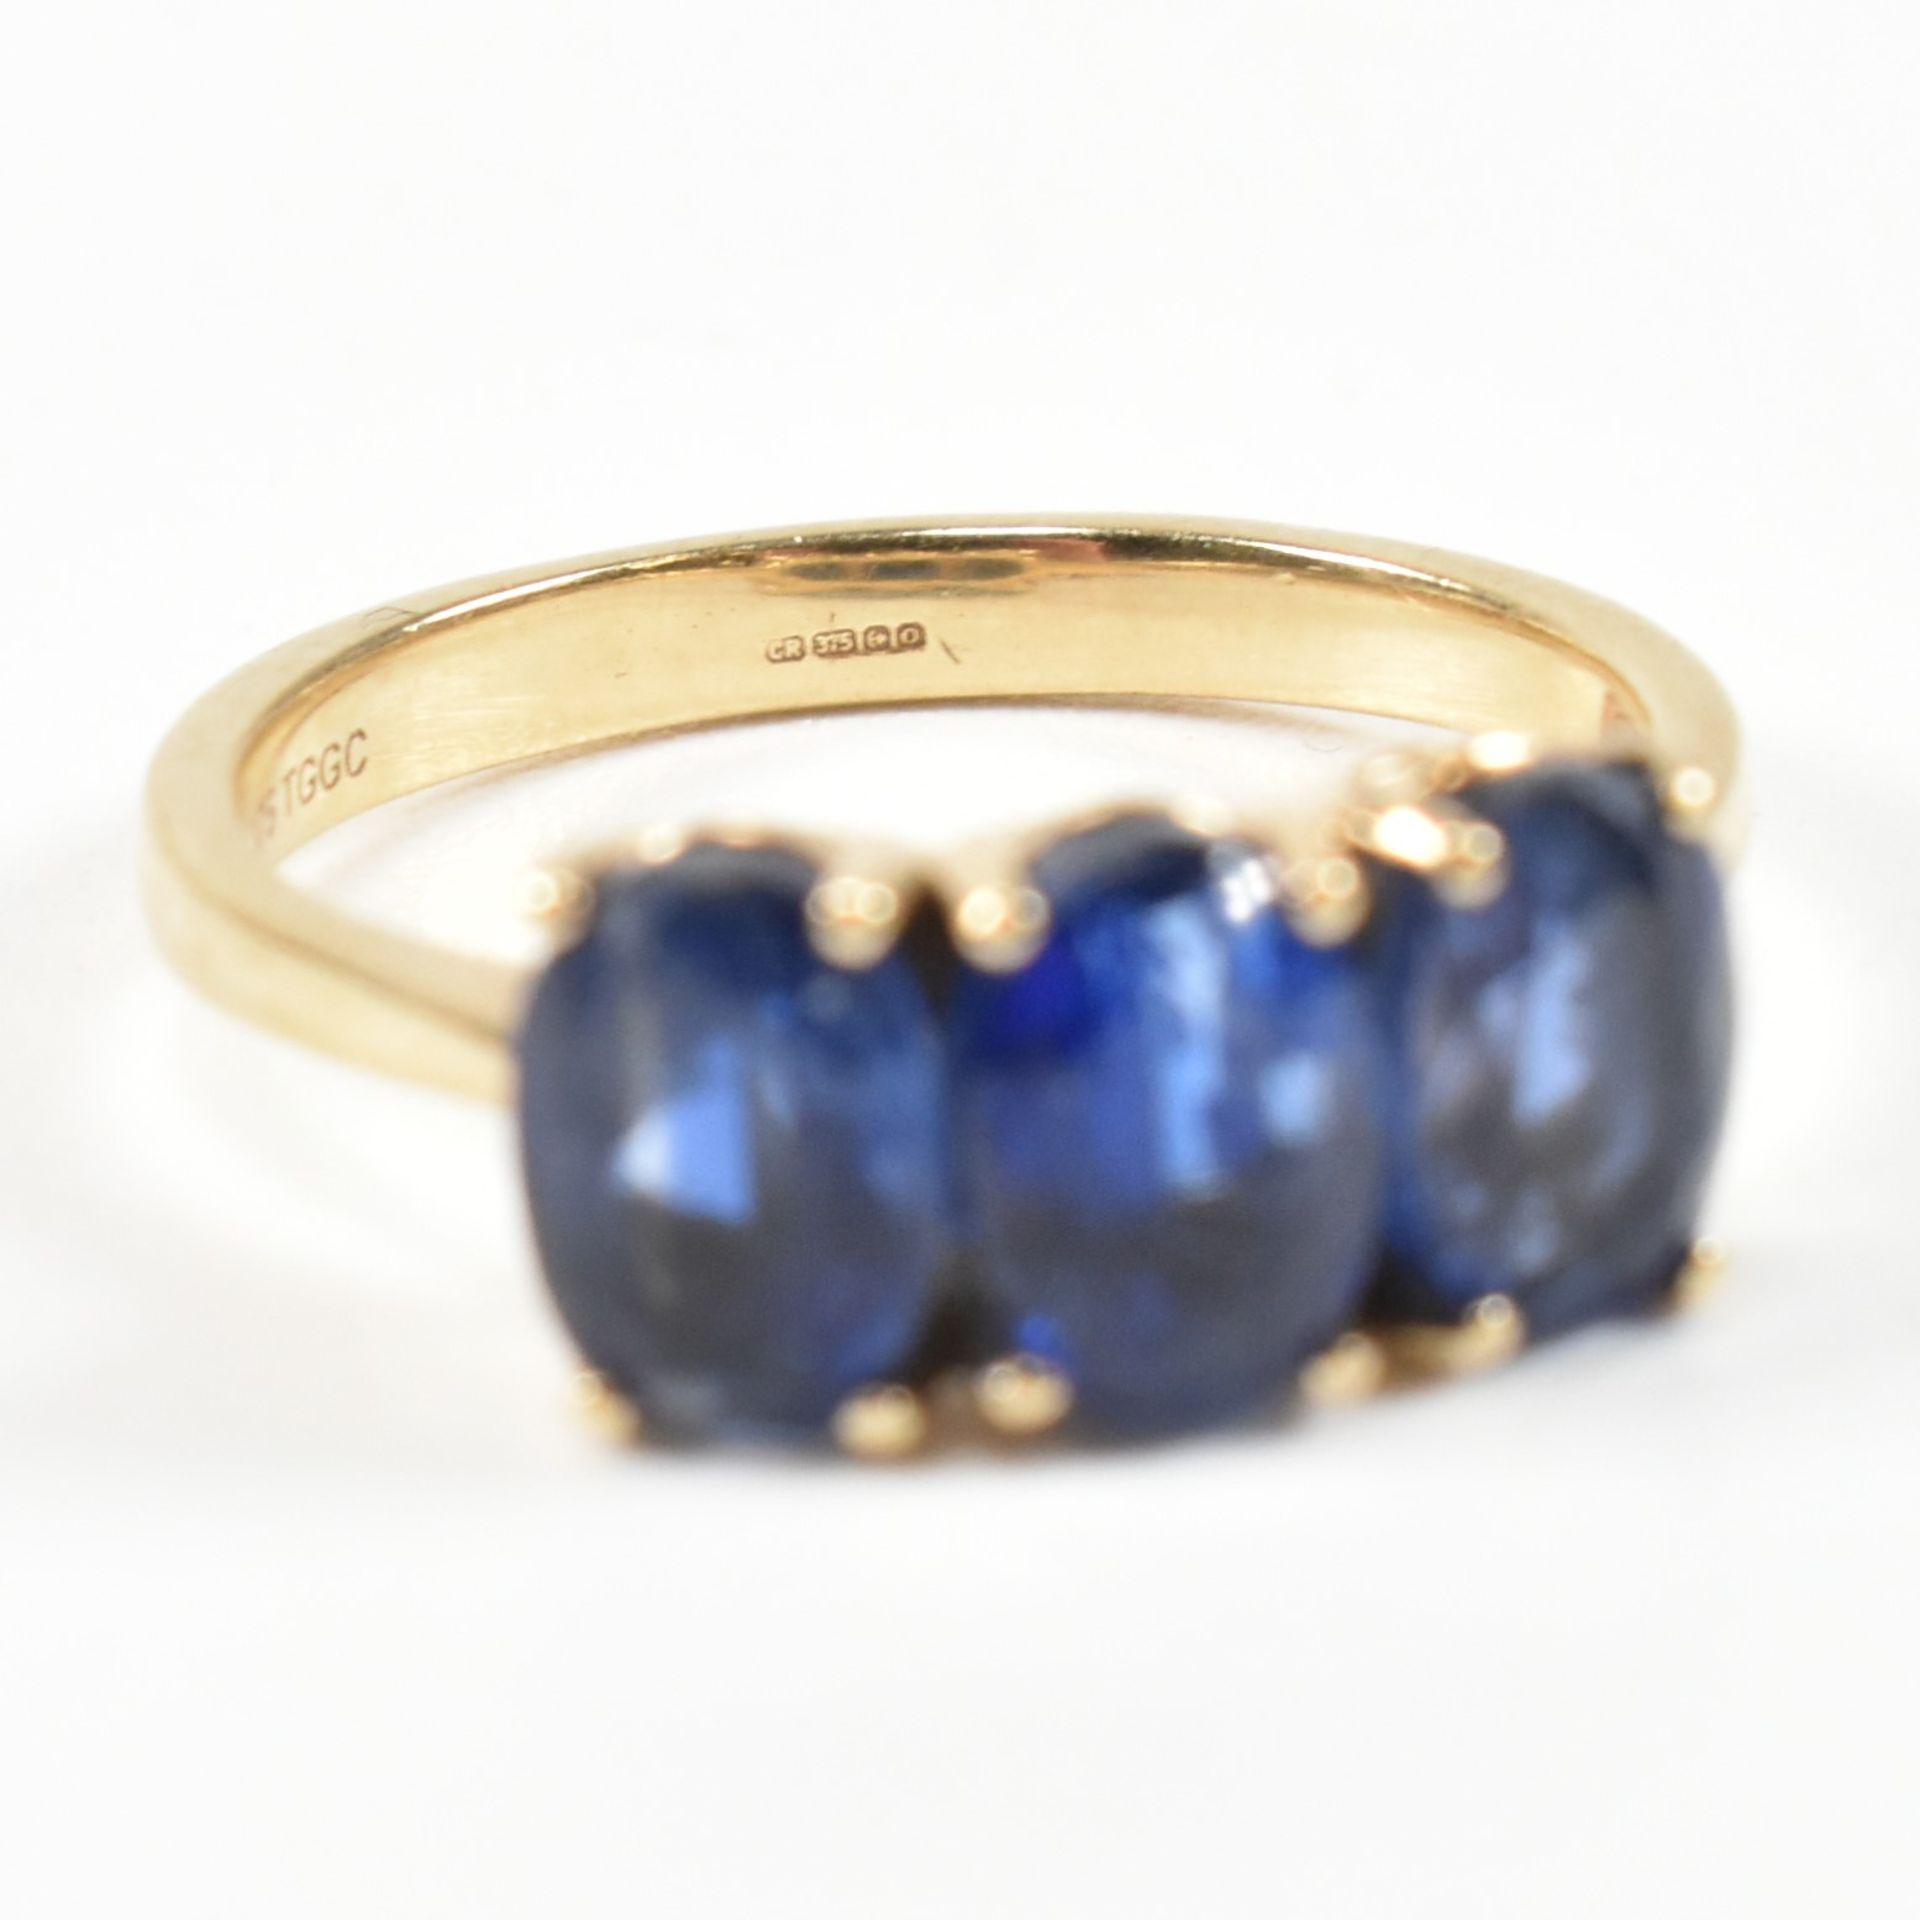 HALLMARKED 9CT GOLD & SYNTHETIC SAPPHIRE THREE STONE RING - Image 7 of 8